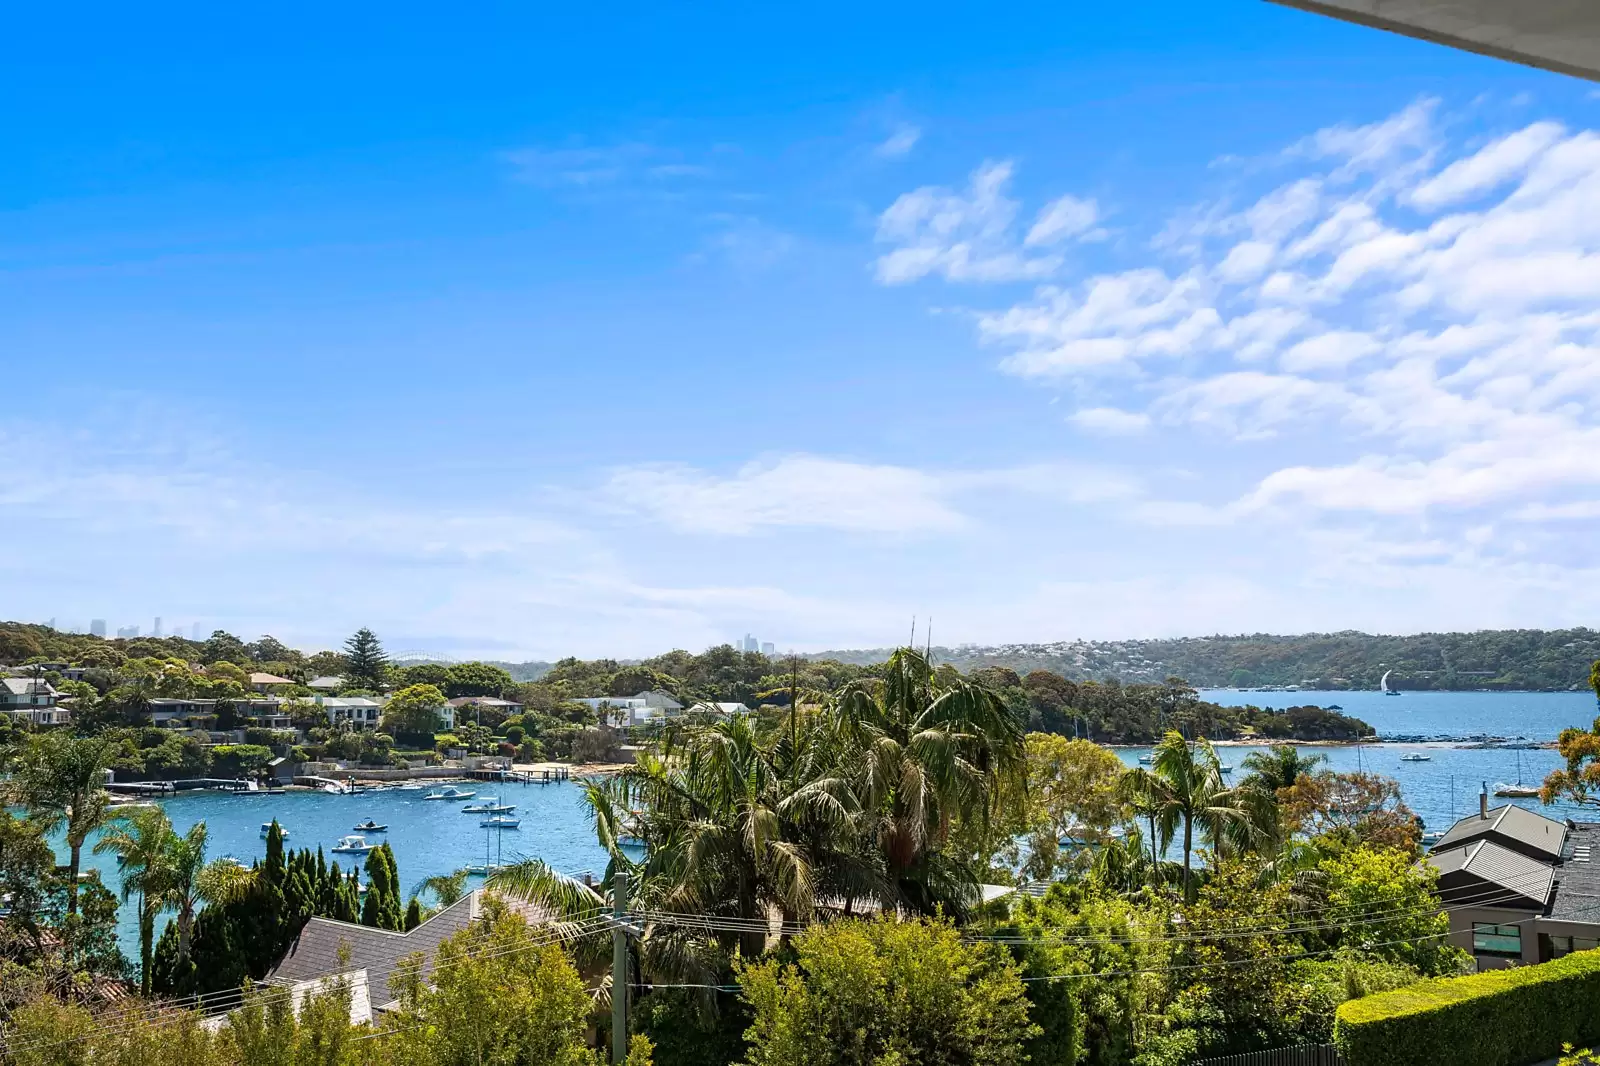 Photo #16: 97 Wentworth Road, Vaucluse - For Sale by Sydney Sotheby's International Realty